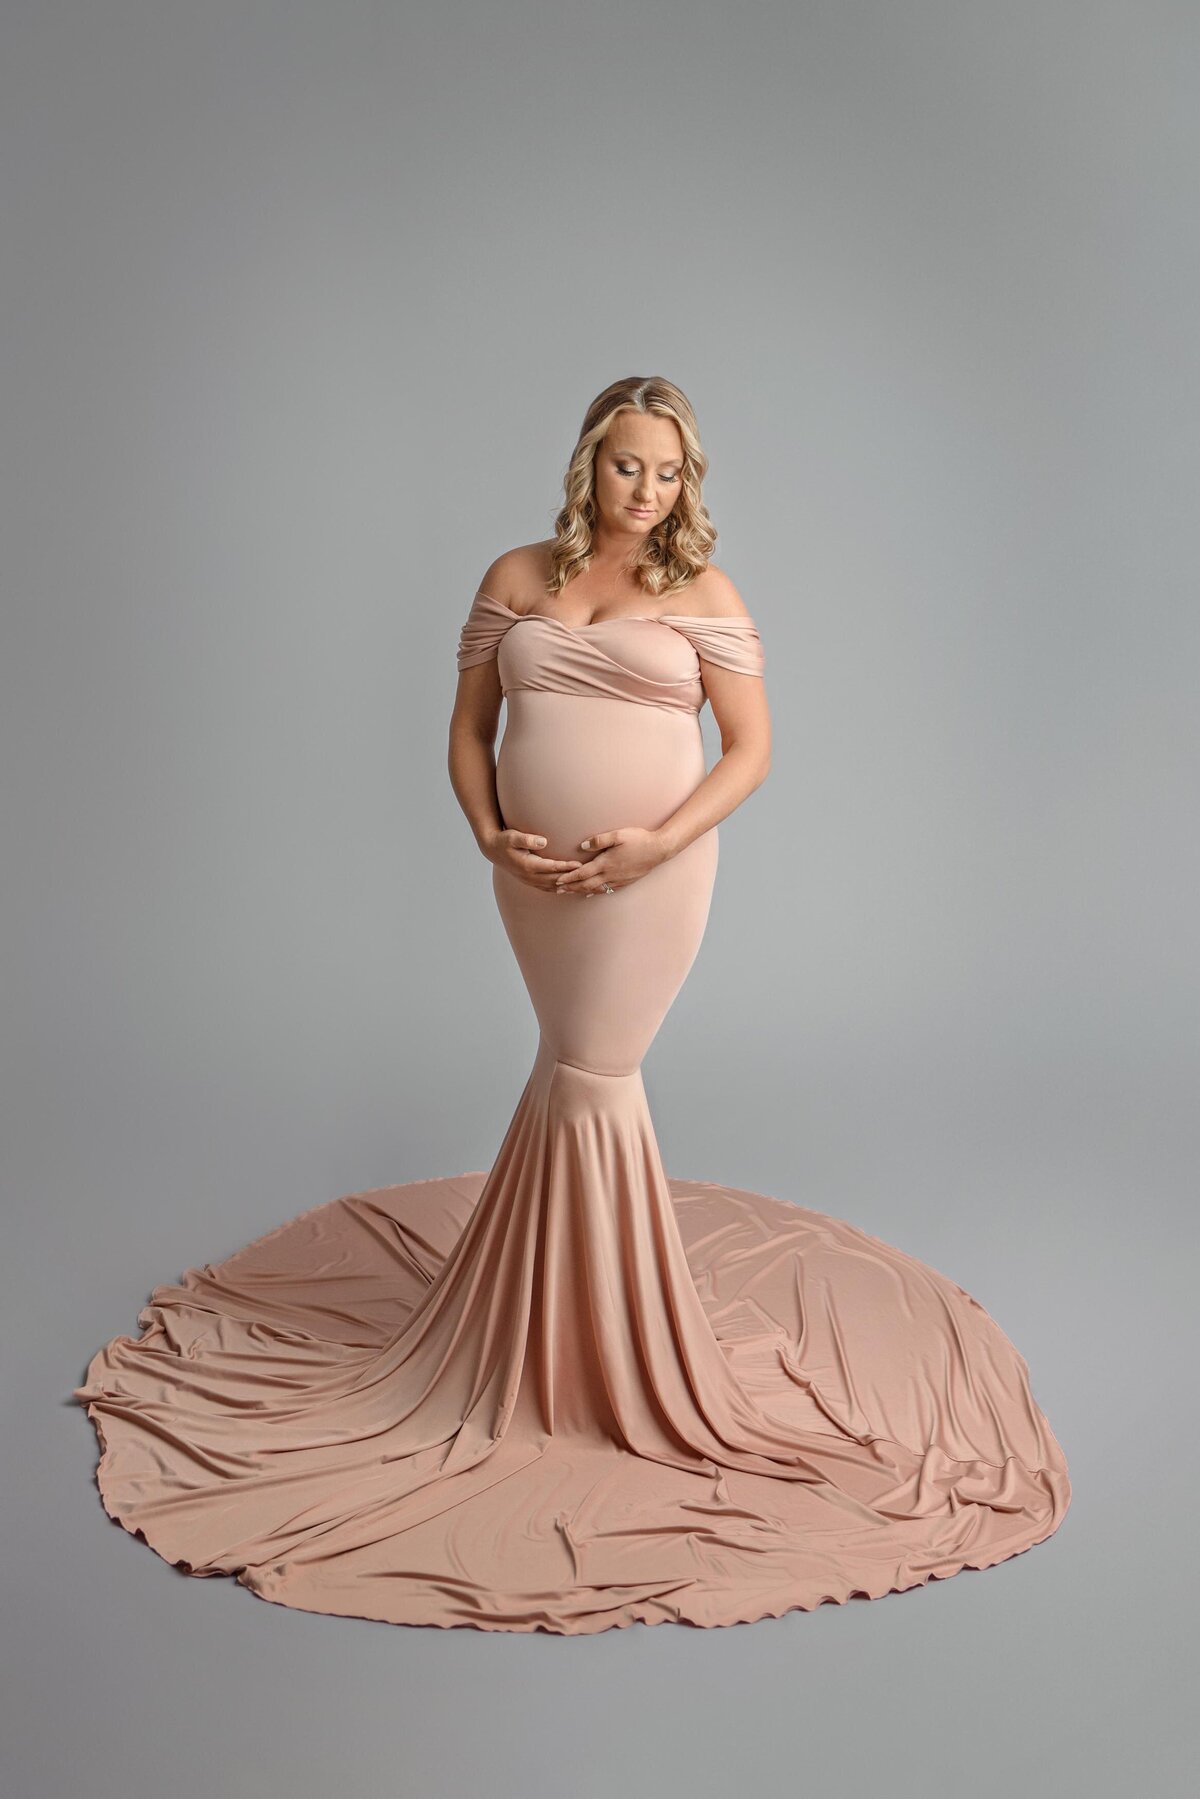 Expecting mom cradling belly dressed in pink flowing dress on grey backdrop